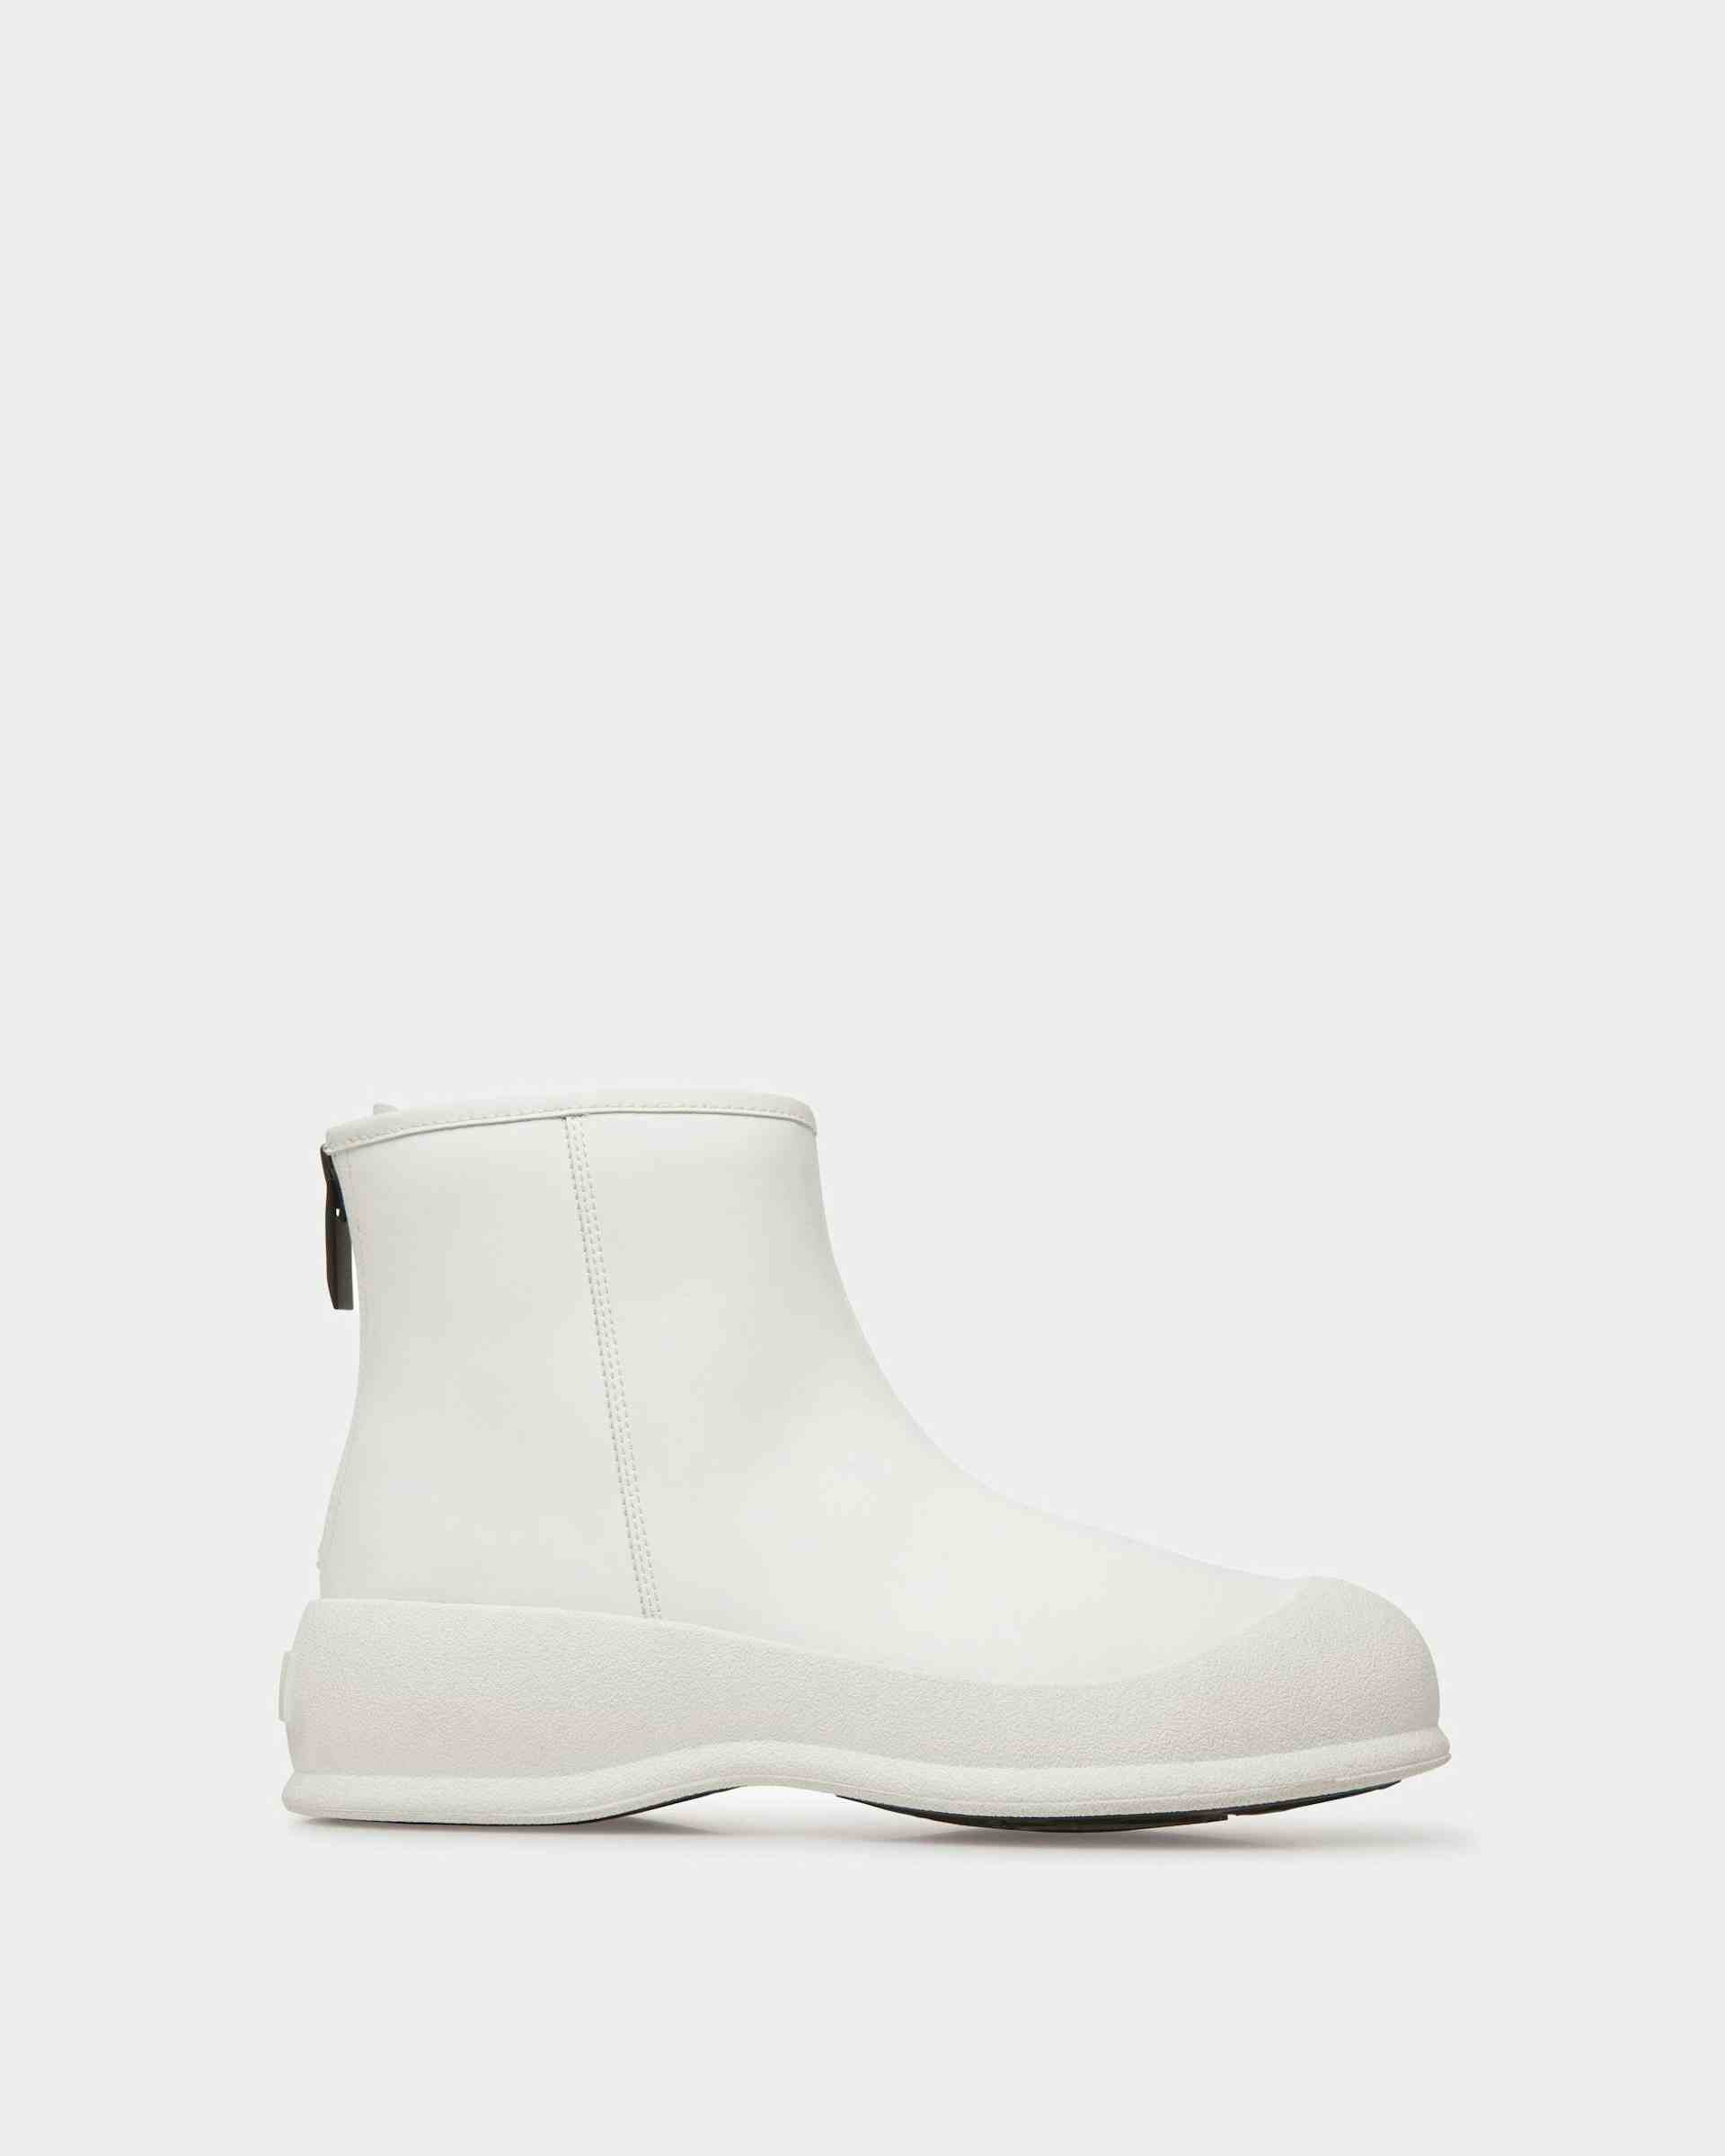 Frei Boots In White Rubber-coated Leather - Women's - Bally